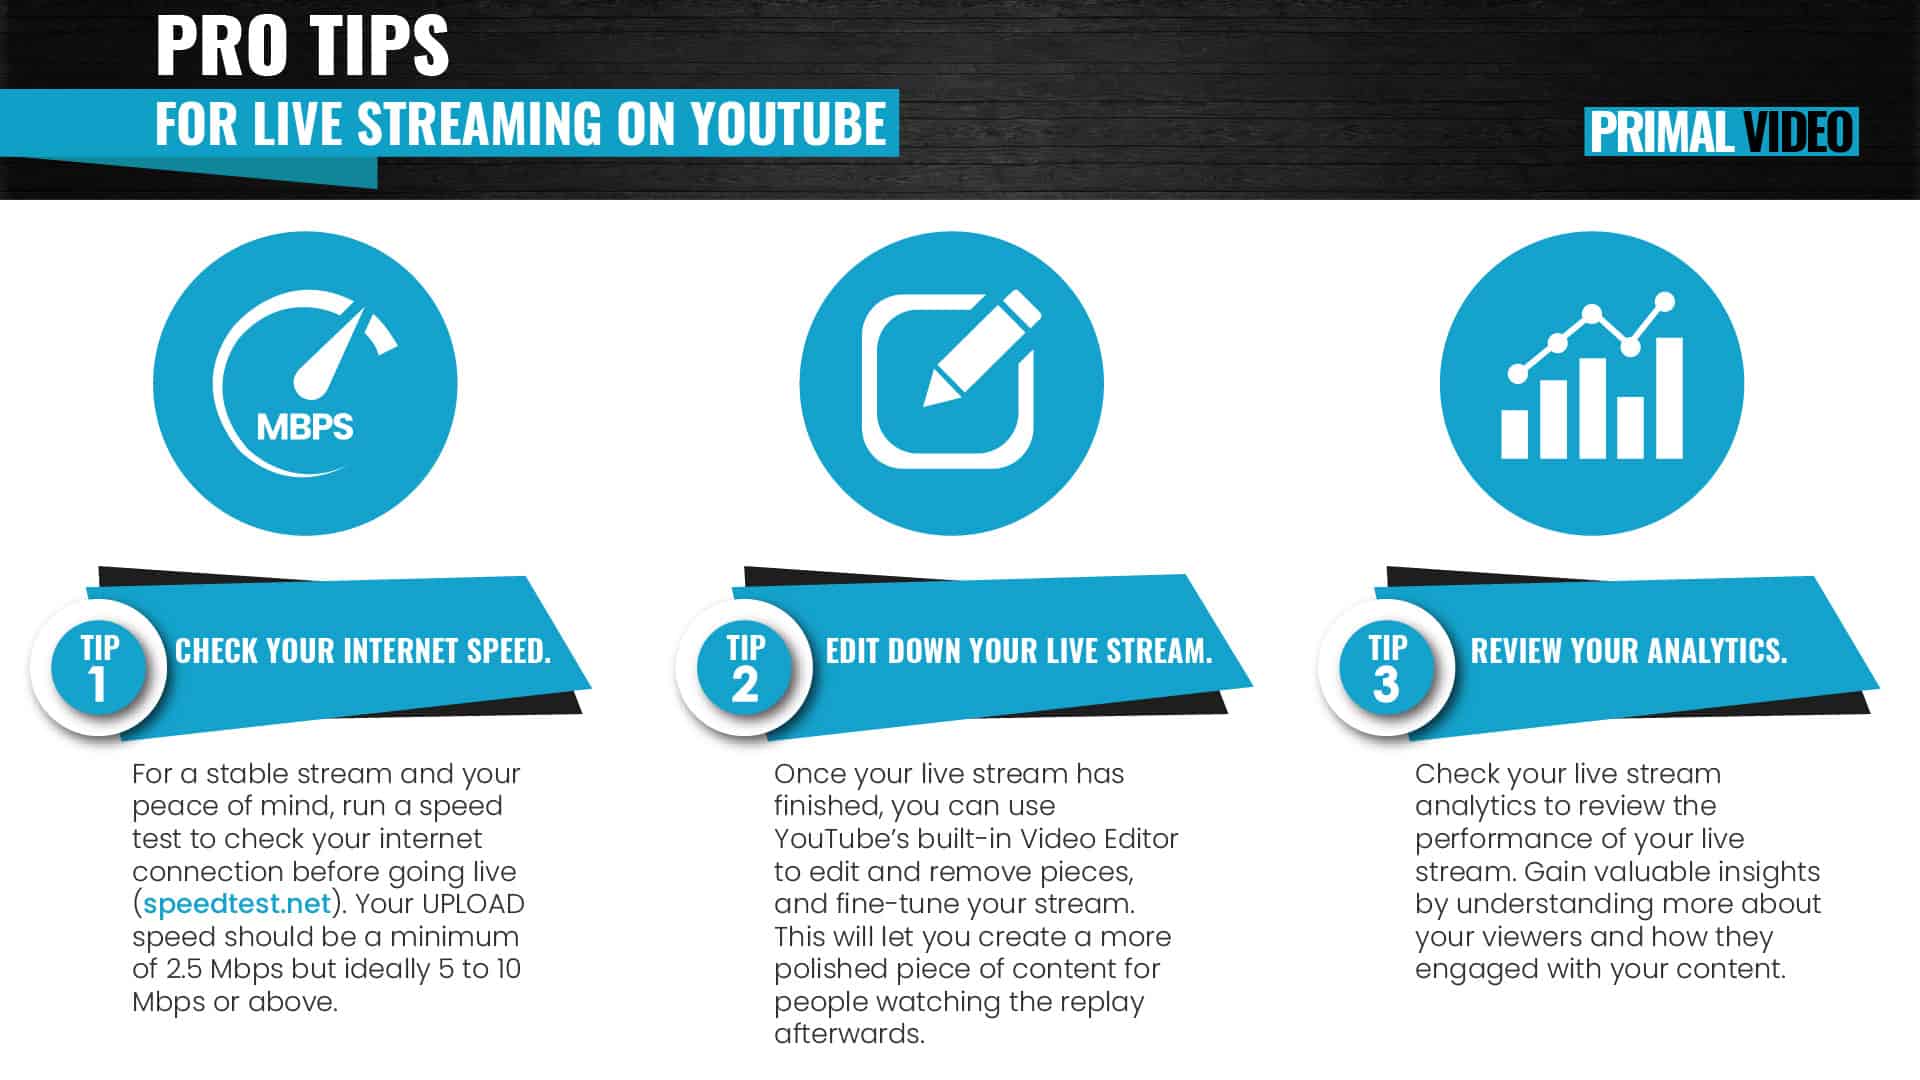 Pro Tips for Live Streaming on YouTube